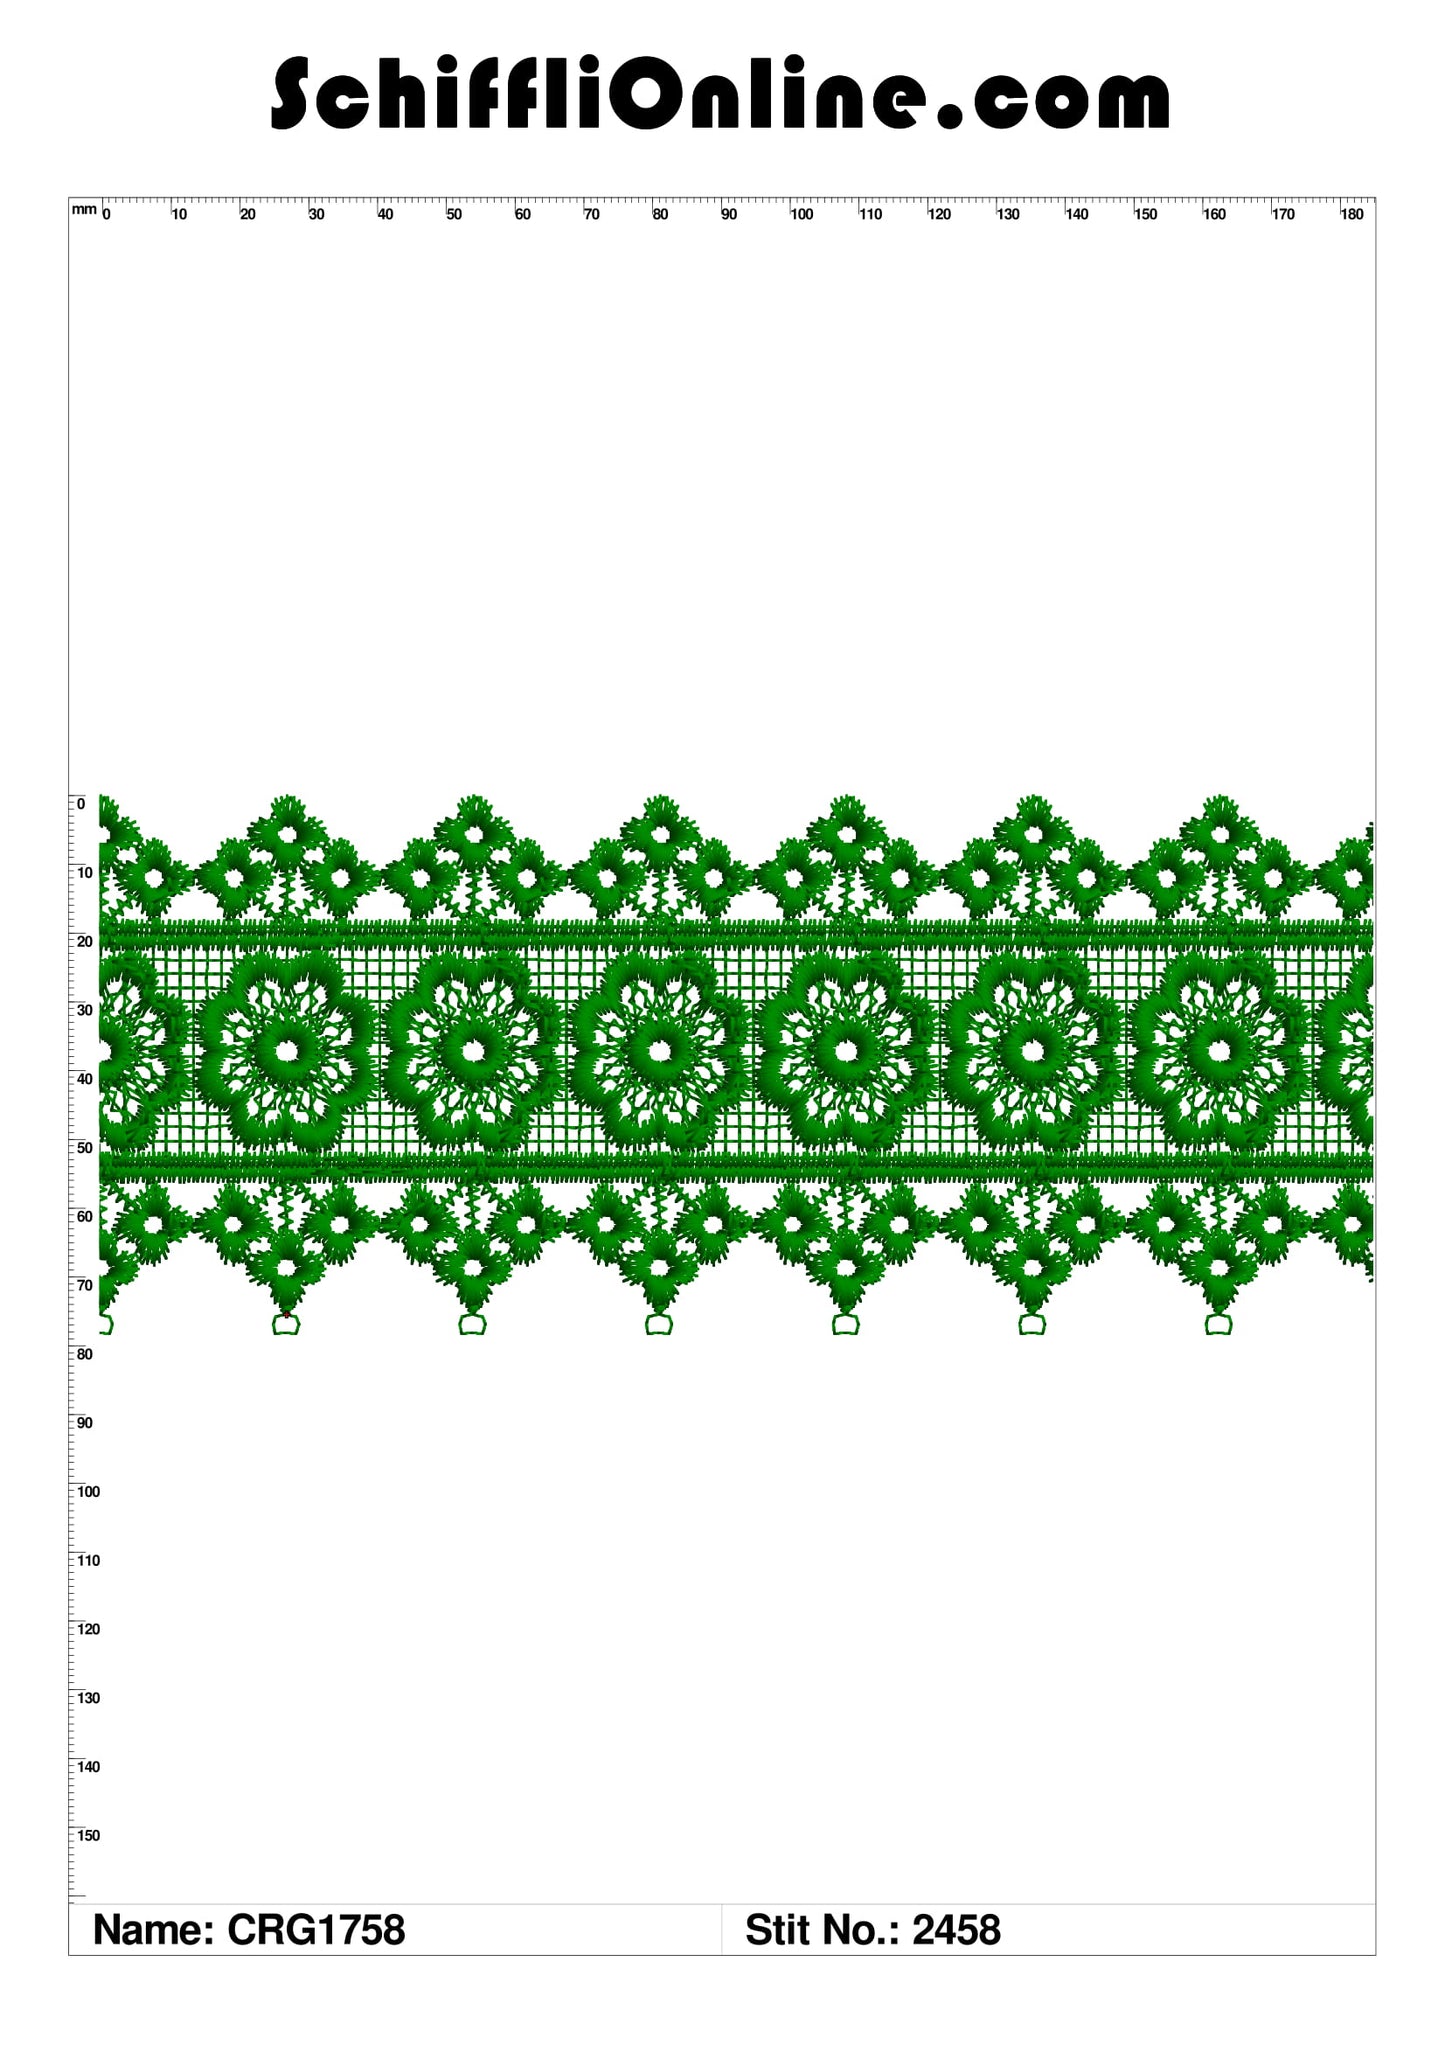 Book 134 CHEMICAL LACE 4X4 50 DESIGNS